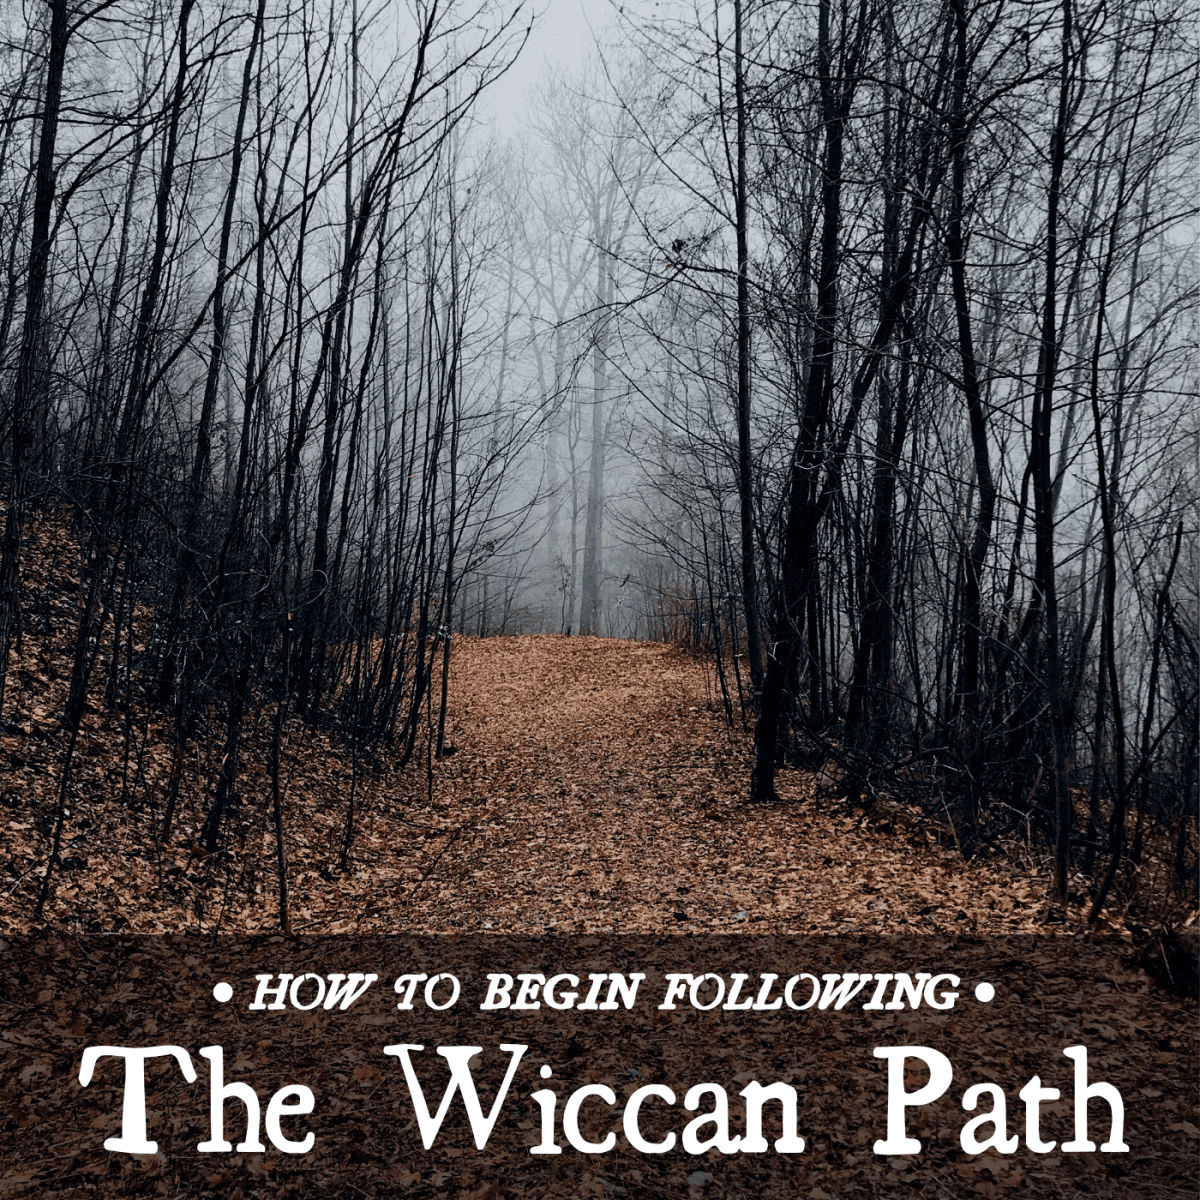 Becoming Wiccan: 7 Useful Steps to Start You on Your Path - Exemplore